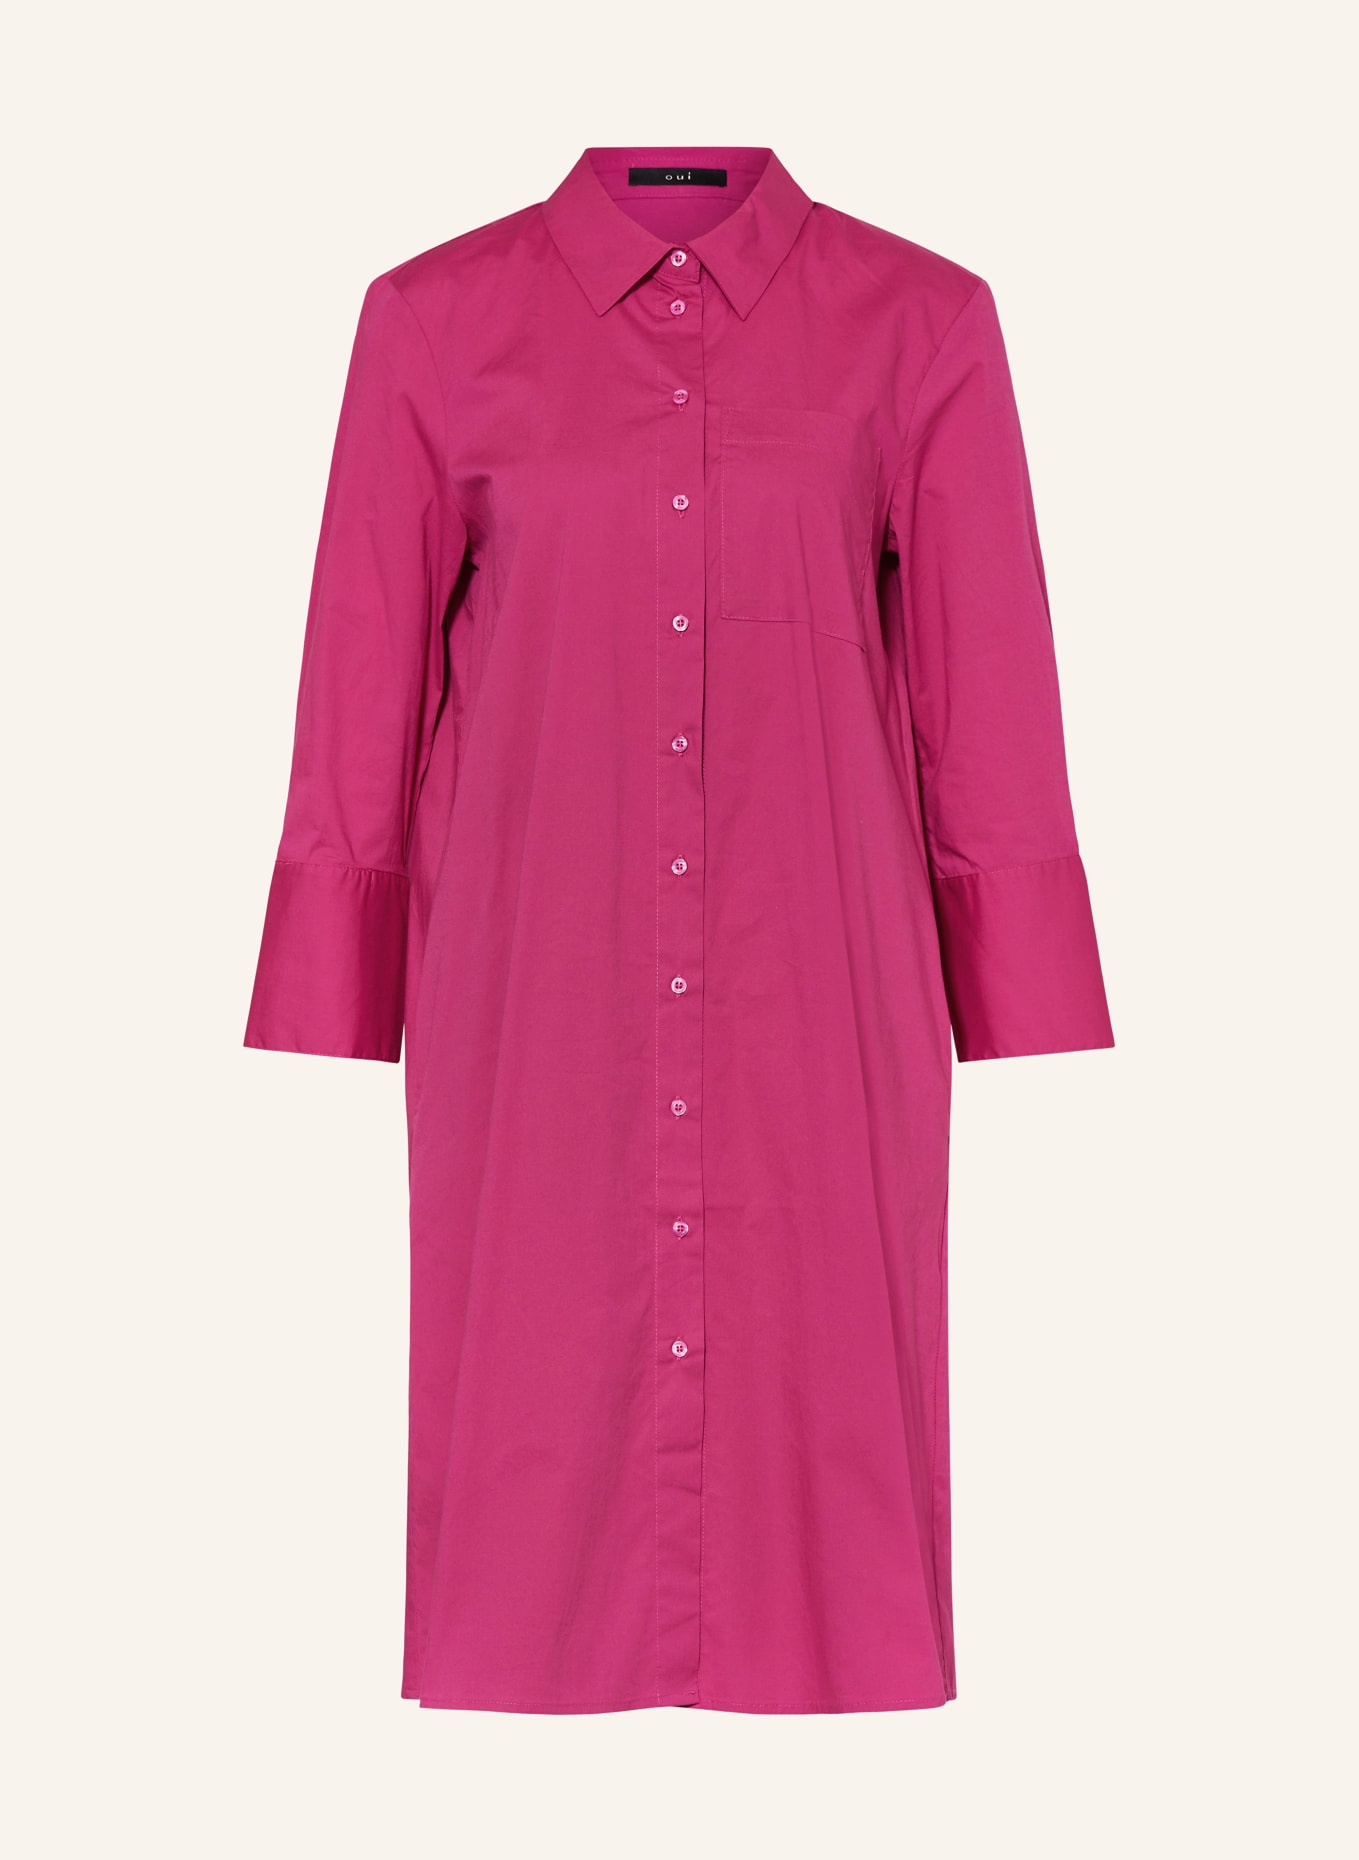 oui Shirt dress with 3/4 sleeves, Color: PINK (Image 1)